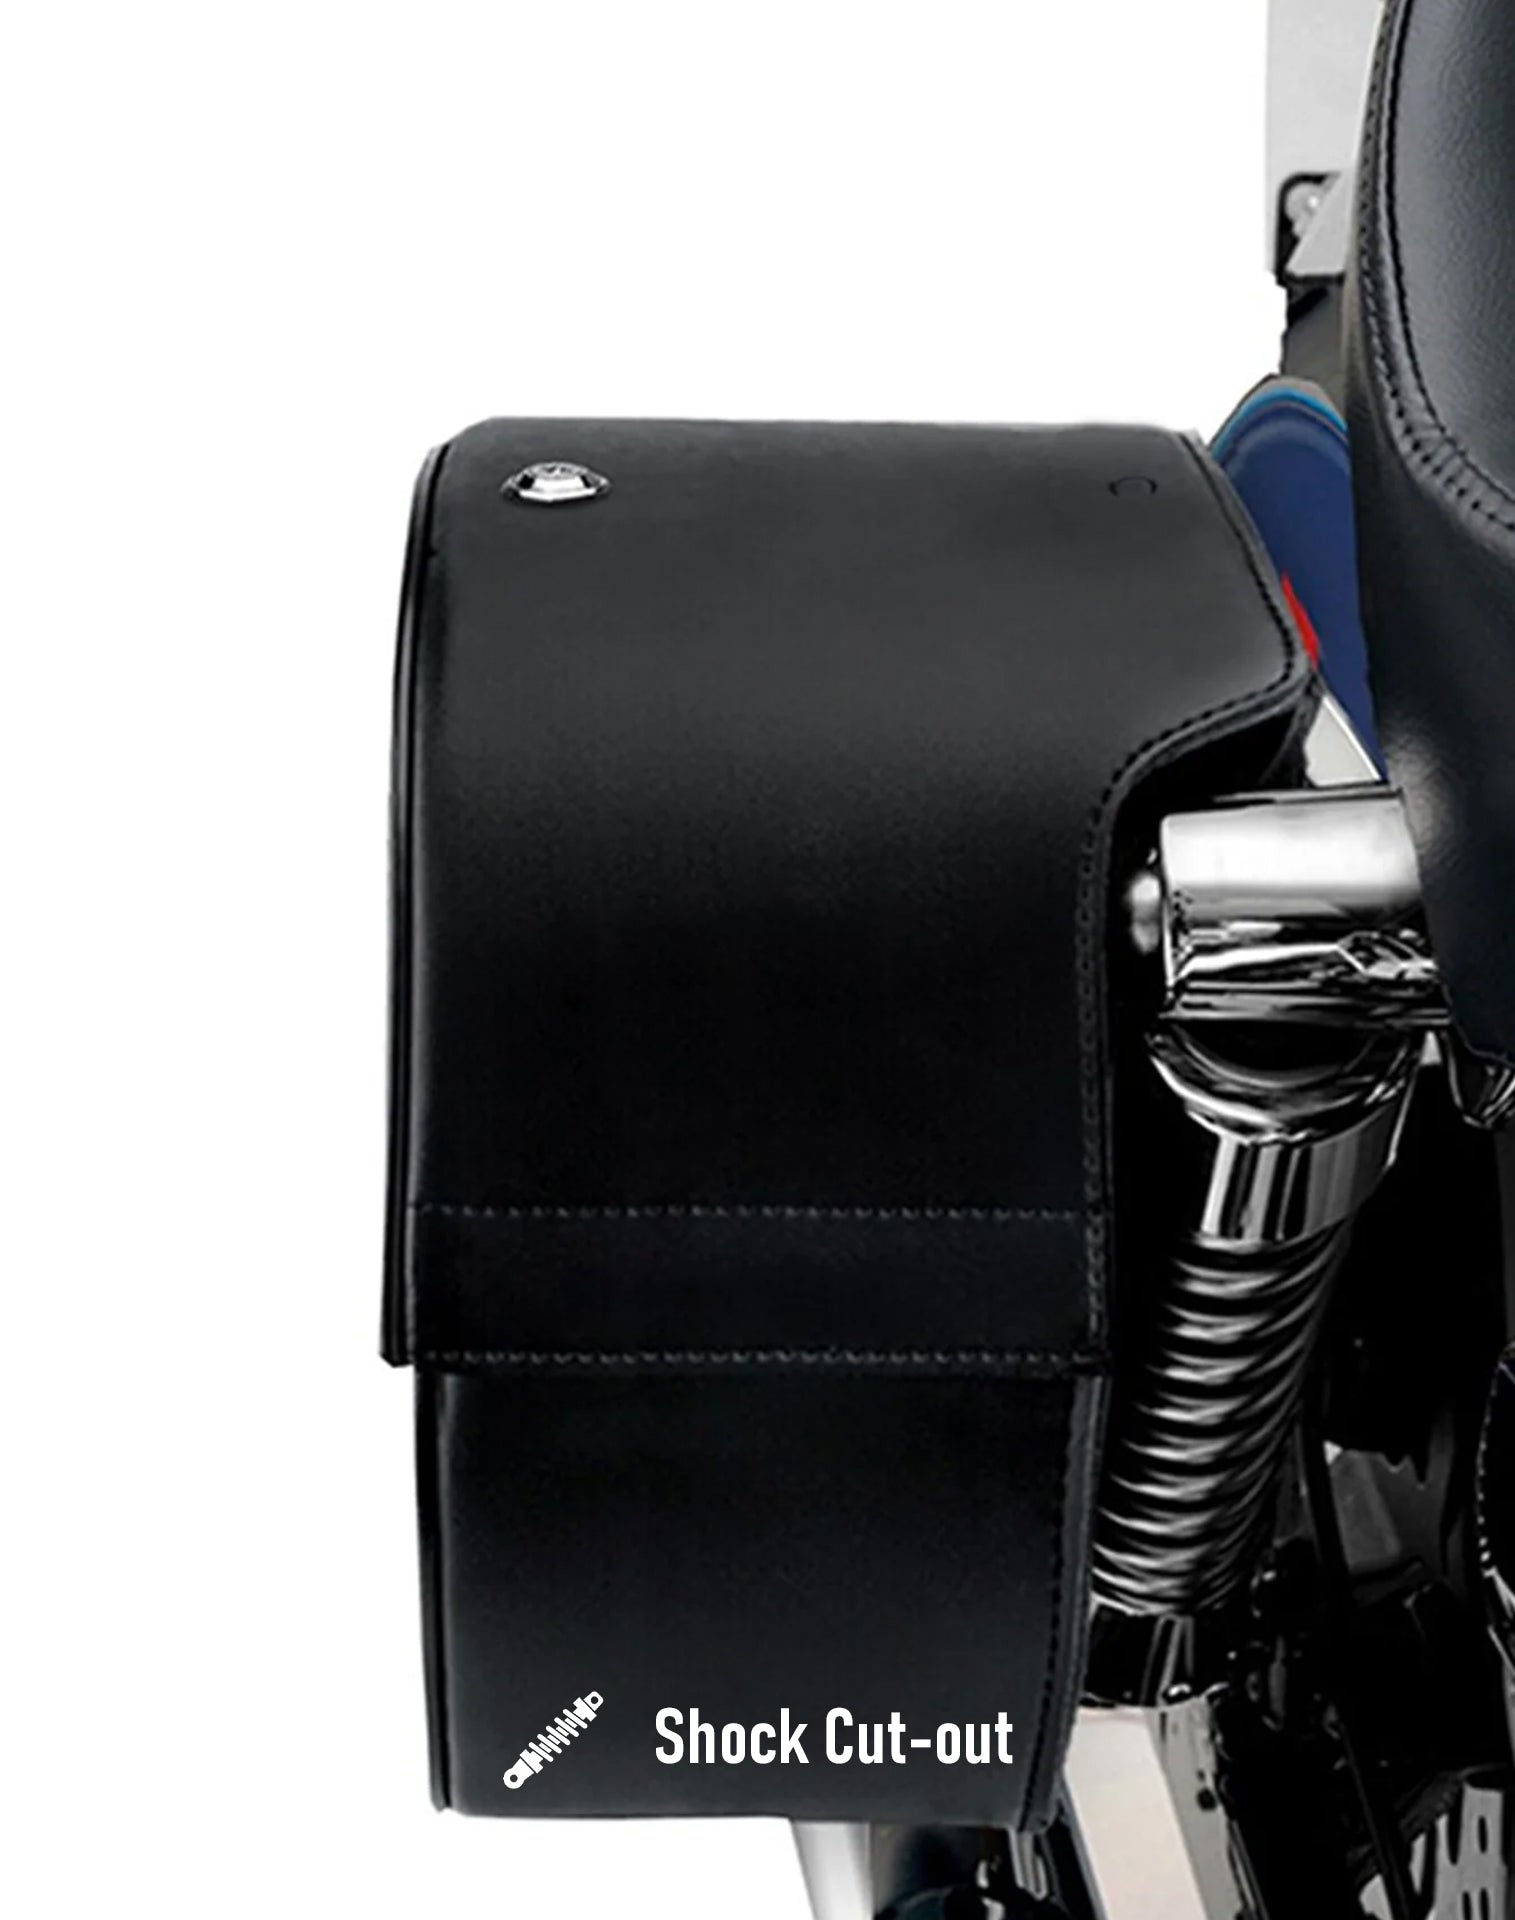 Viking Warrior Large Shock Cut Out Leather Motorcycle Saddlebags For Harley Street 750 Hard Shell Construction